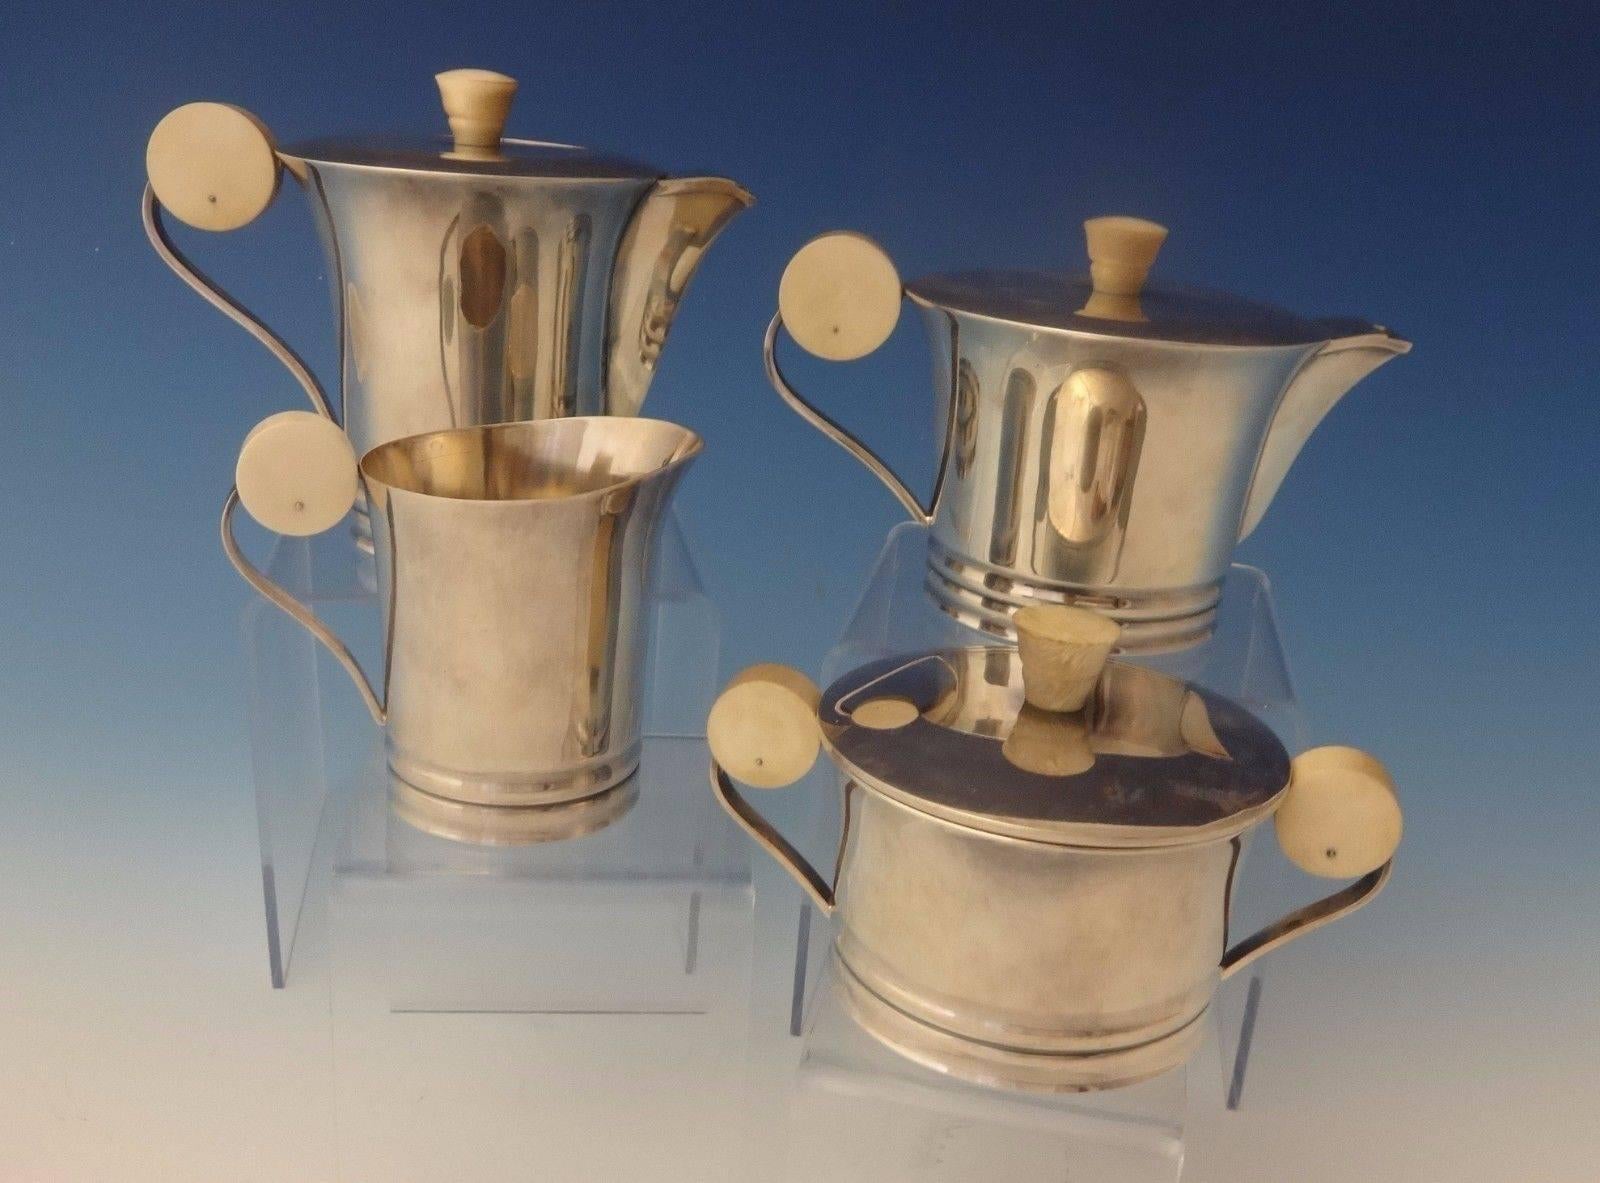 French .950 sterling silver. 

Art Deco French sterling petite individual tea set with finials and distinctive large round accents on the handles. The set dates from 1915-1930's. The maker is unknown. The set includes:

Coffee pot: Measures 4 1/2